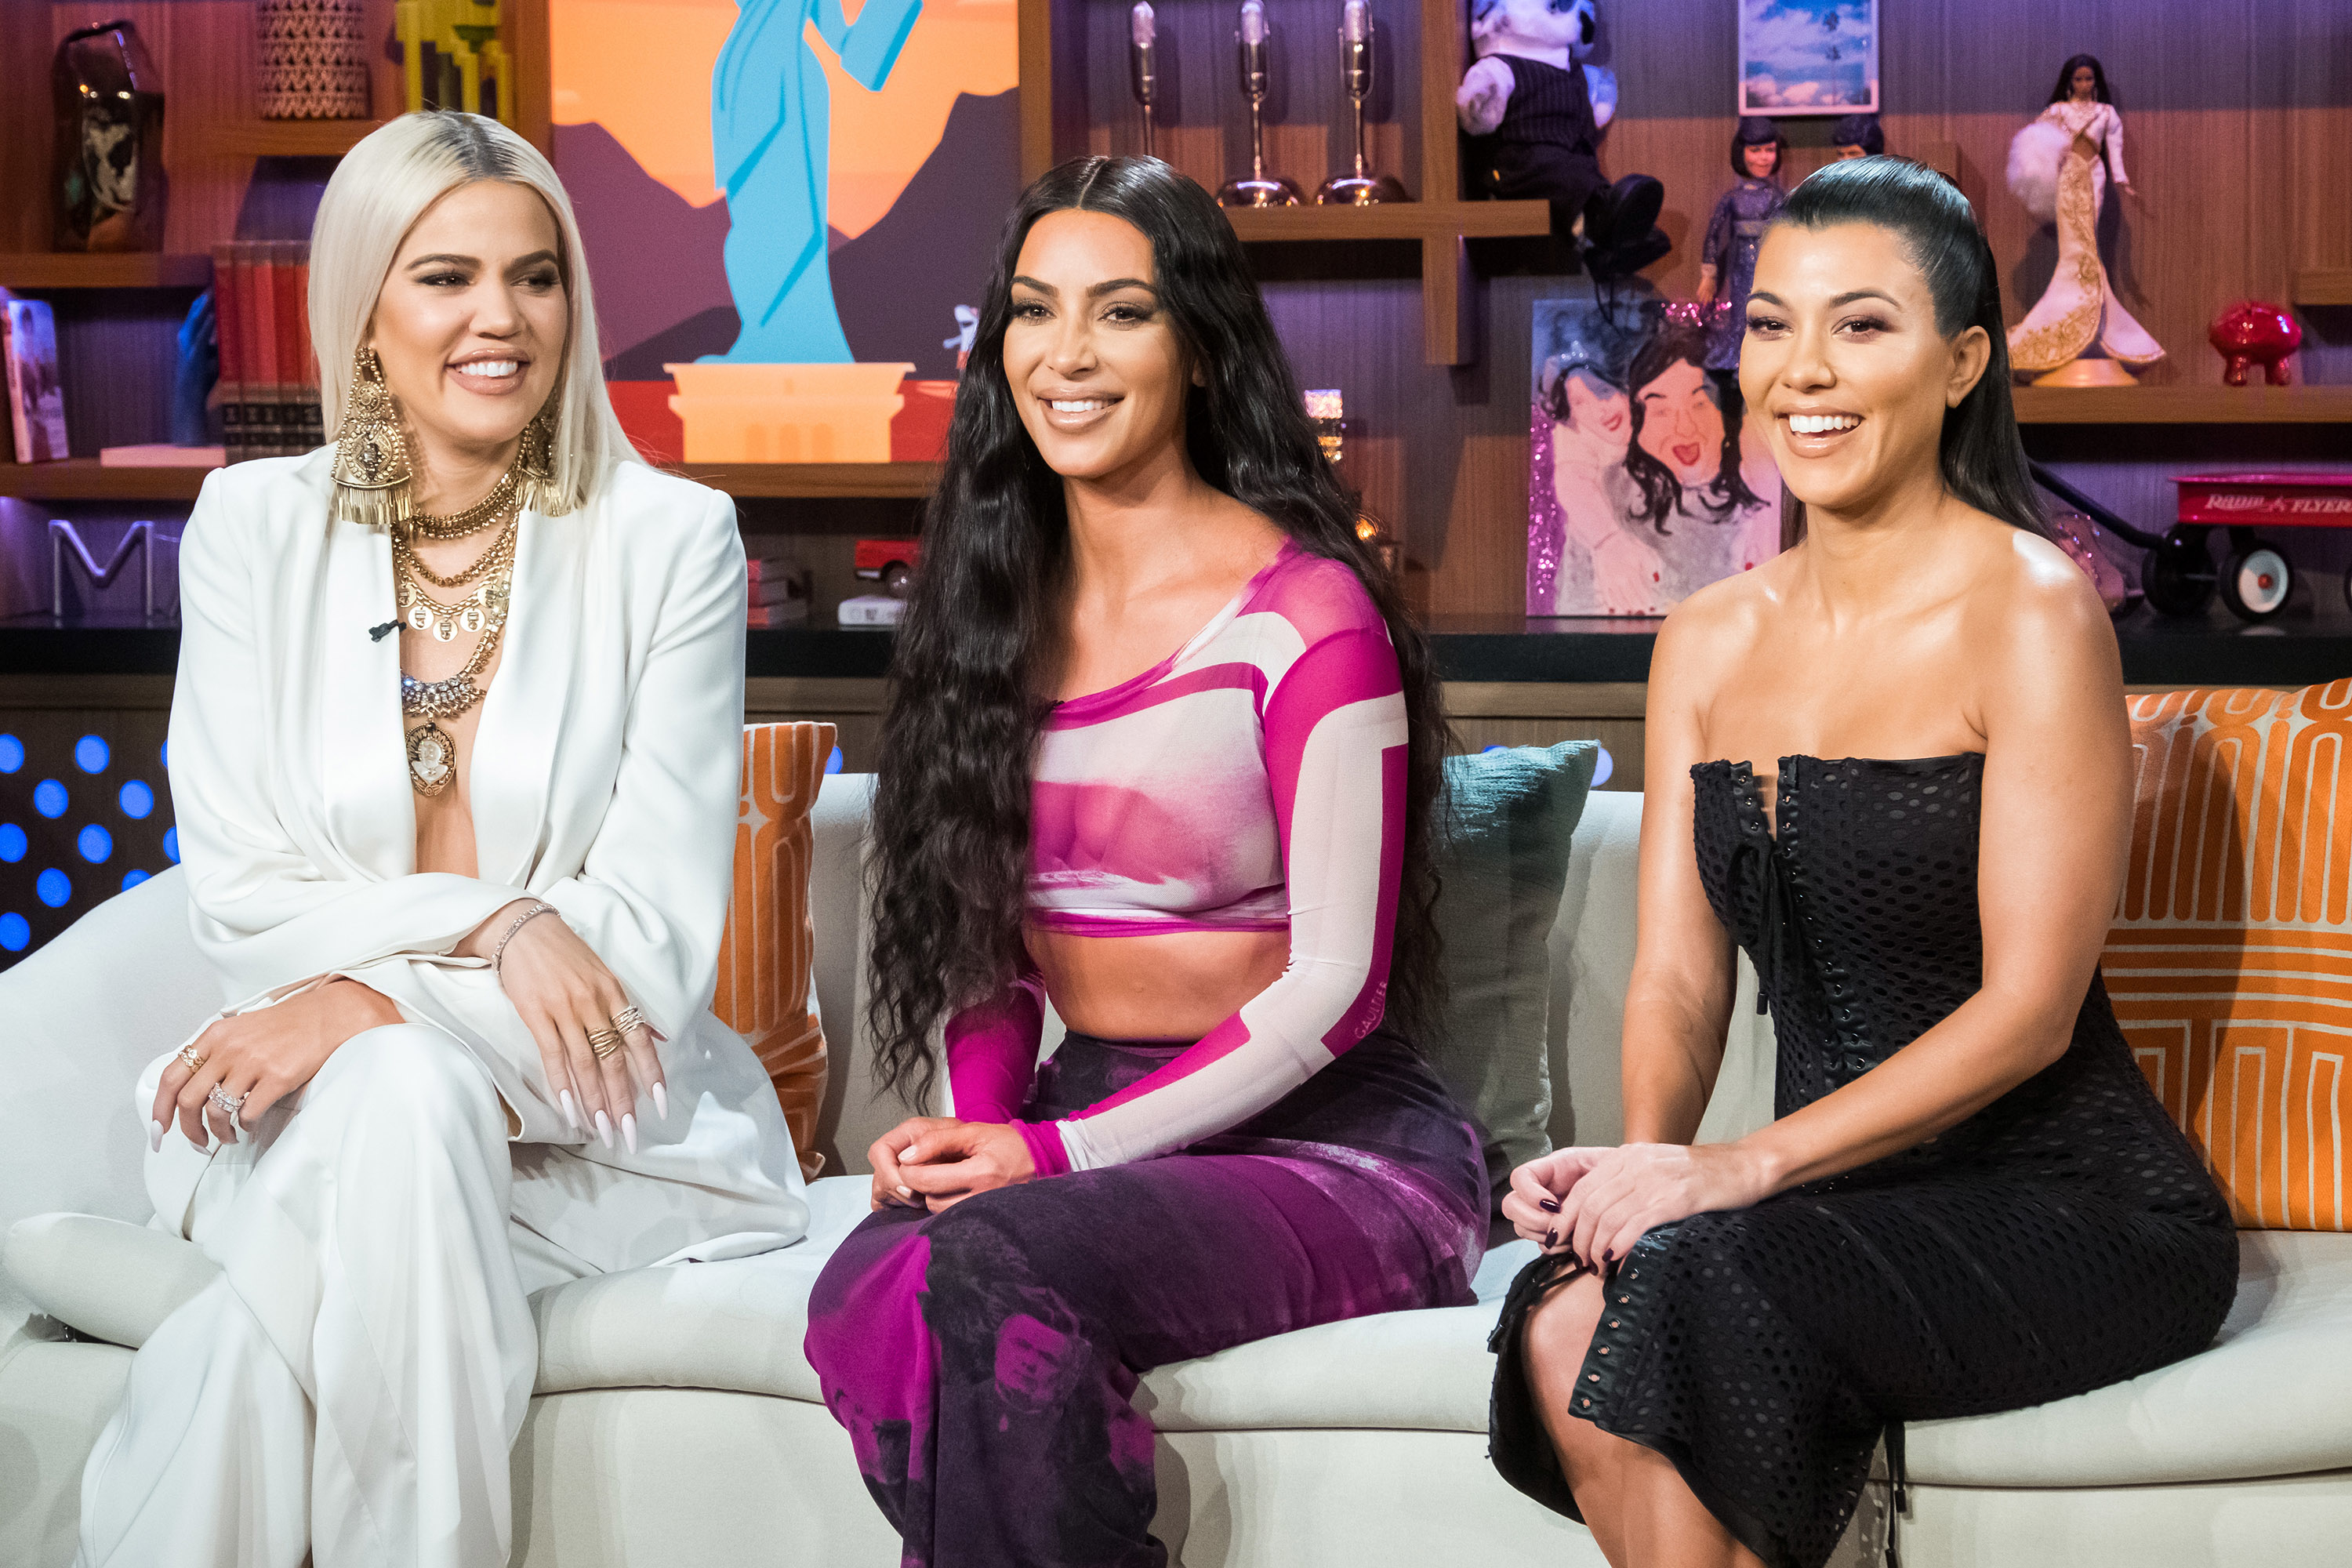 khloe, kourtney and kim sitting for an interview